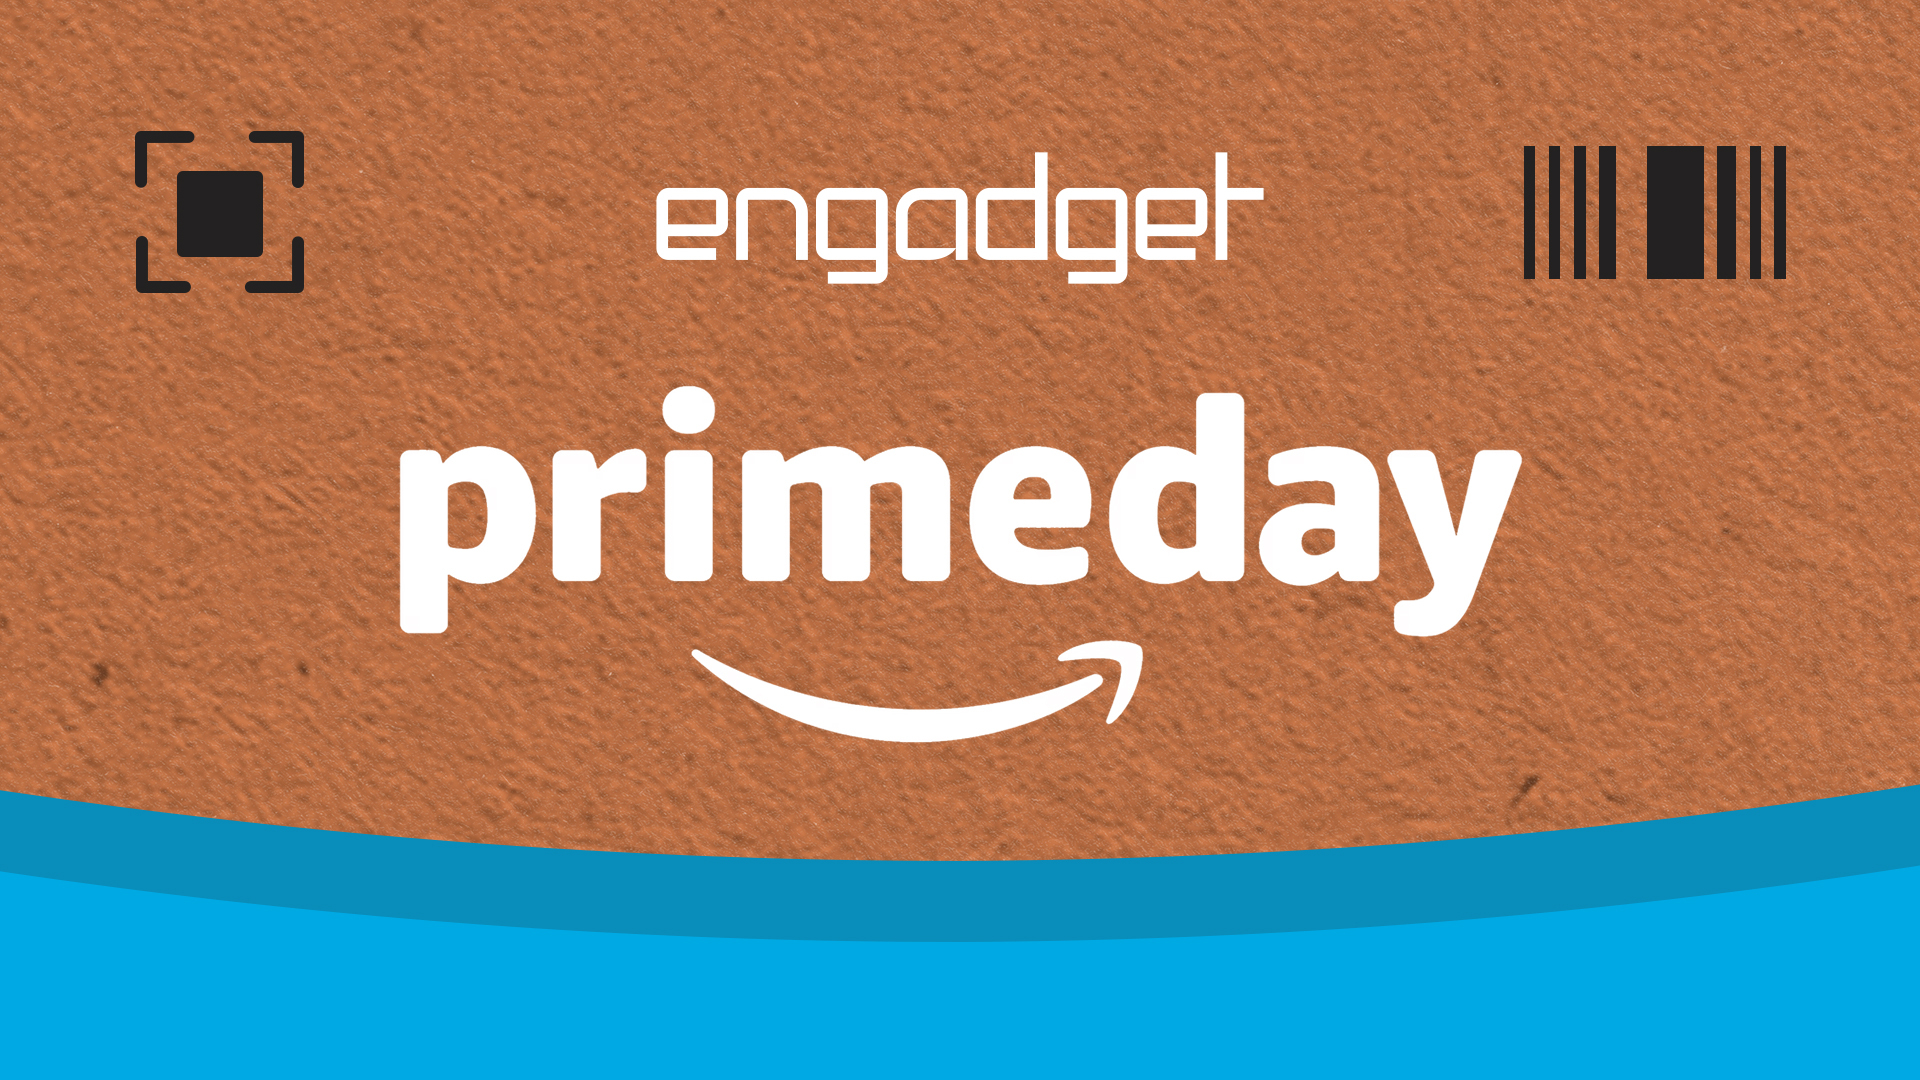 Amazon Prime Day kicks off July 11th this year